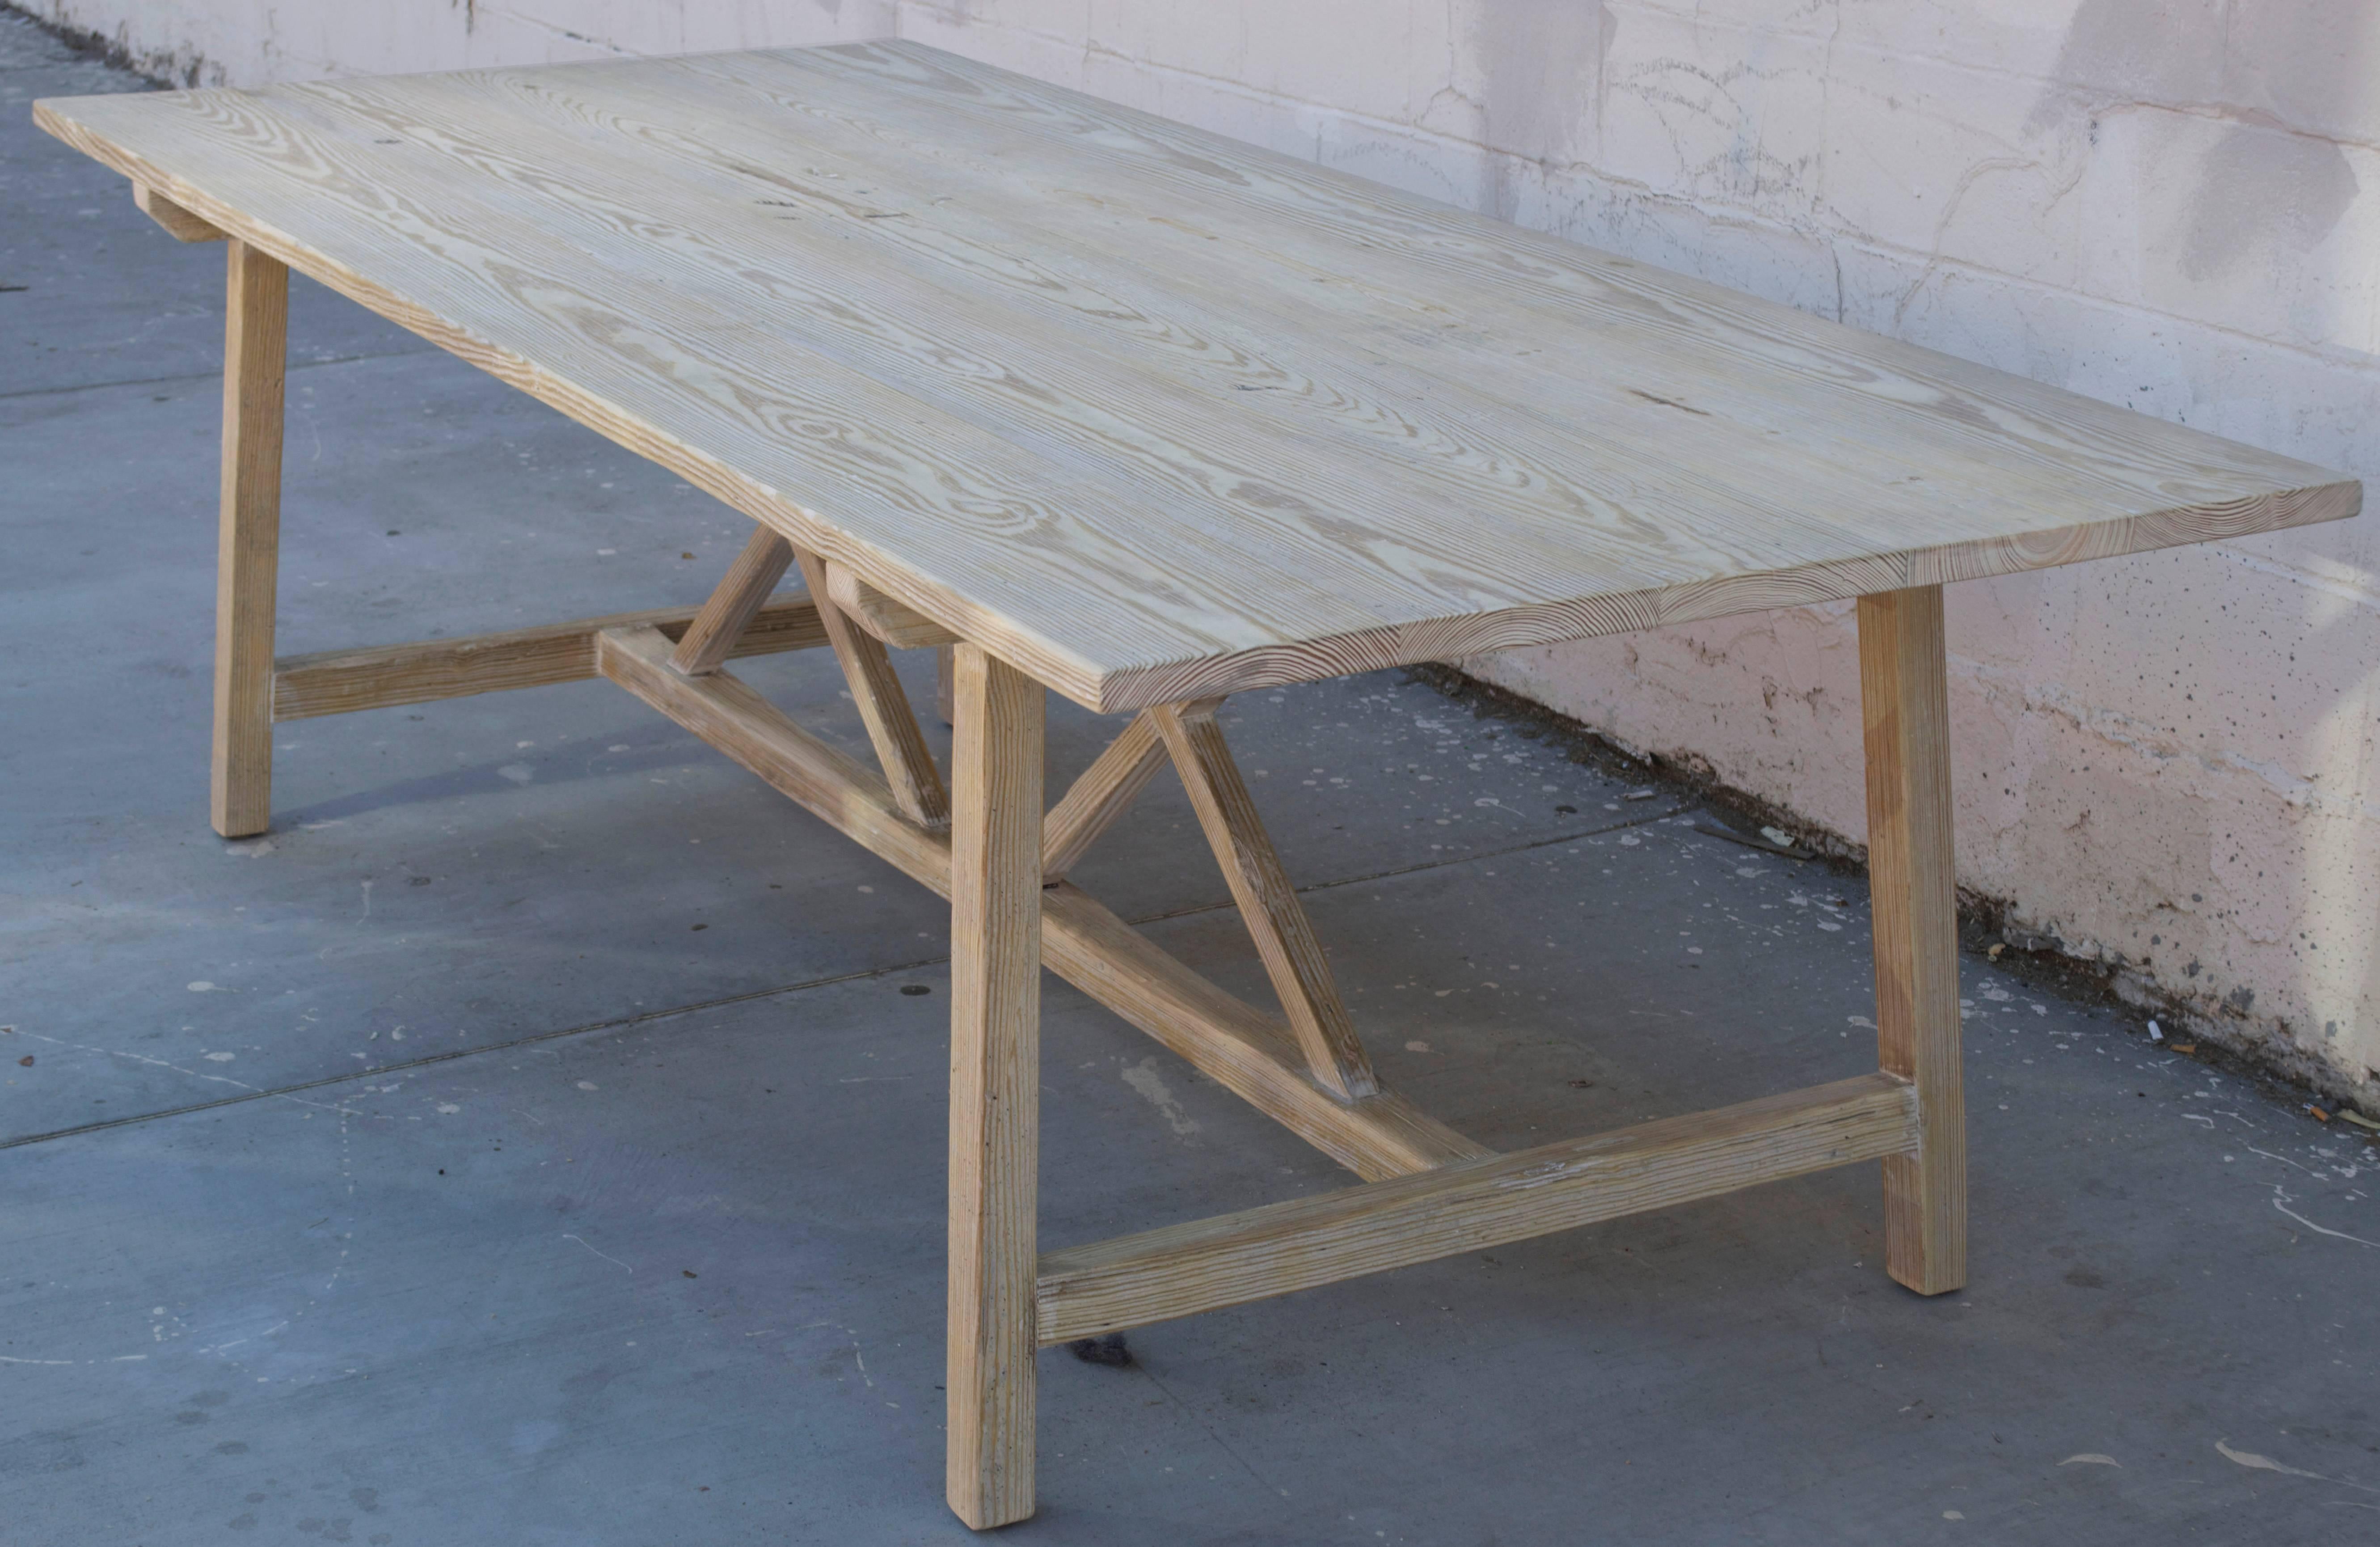 This vintage pine farm table has splayed legs with nicely worn planks and patina.

Because each table is bench-made in our own Los Angeles workshop you can influence all aspects of design, including size, wood species and finish. We use only